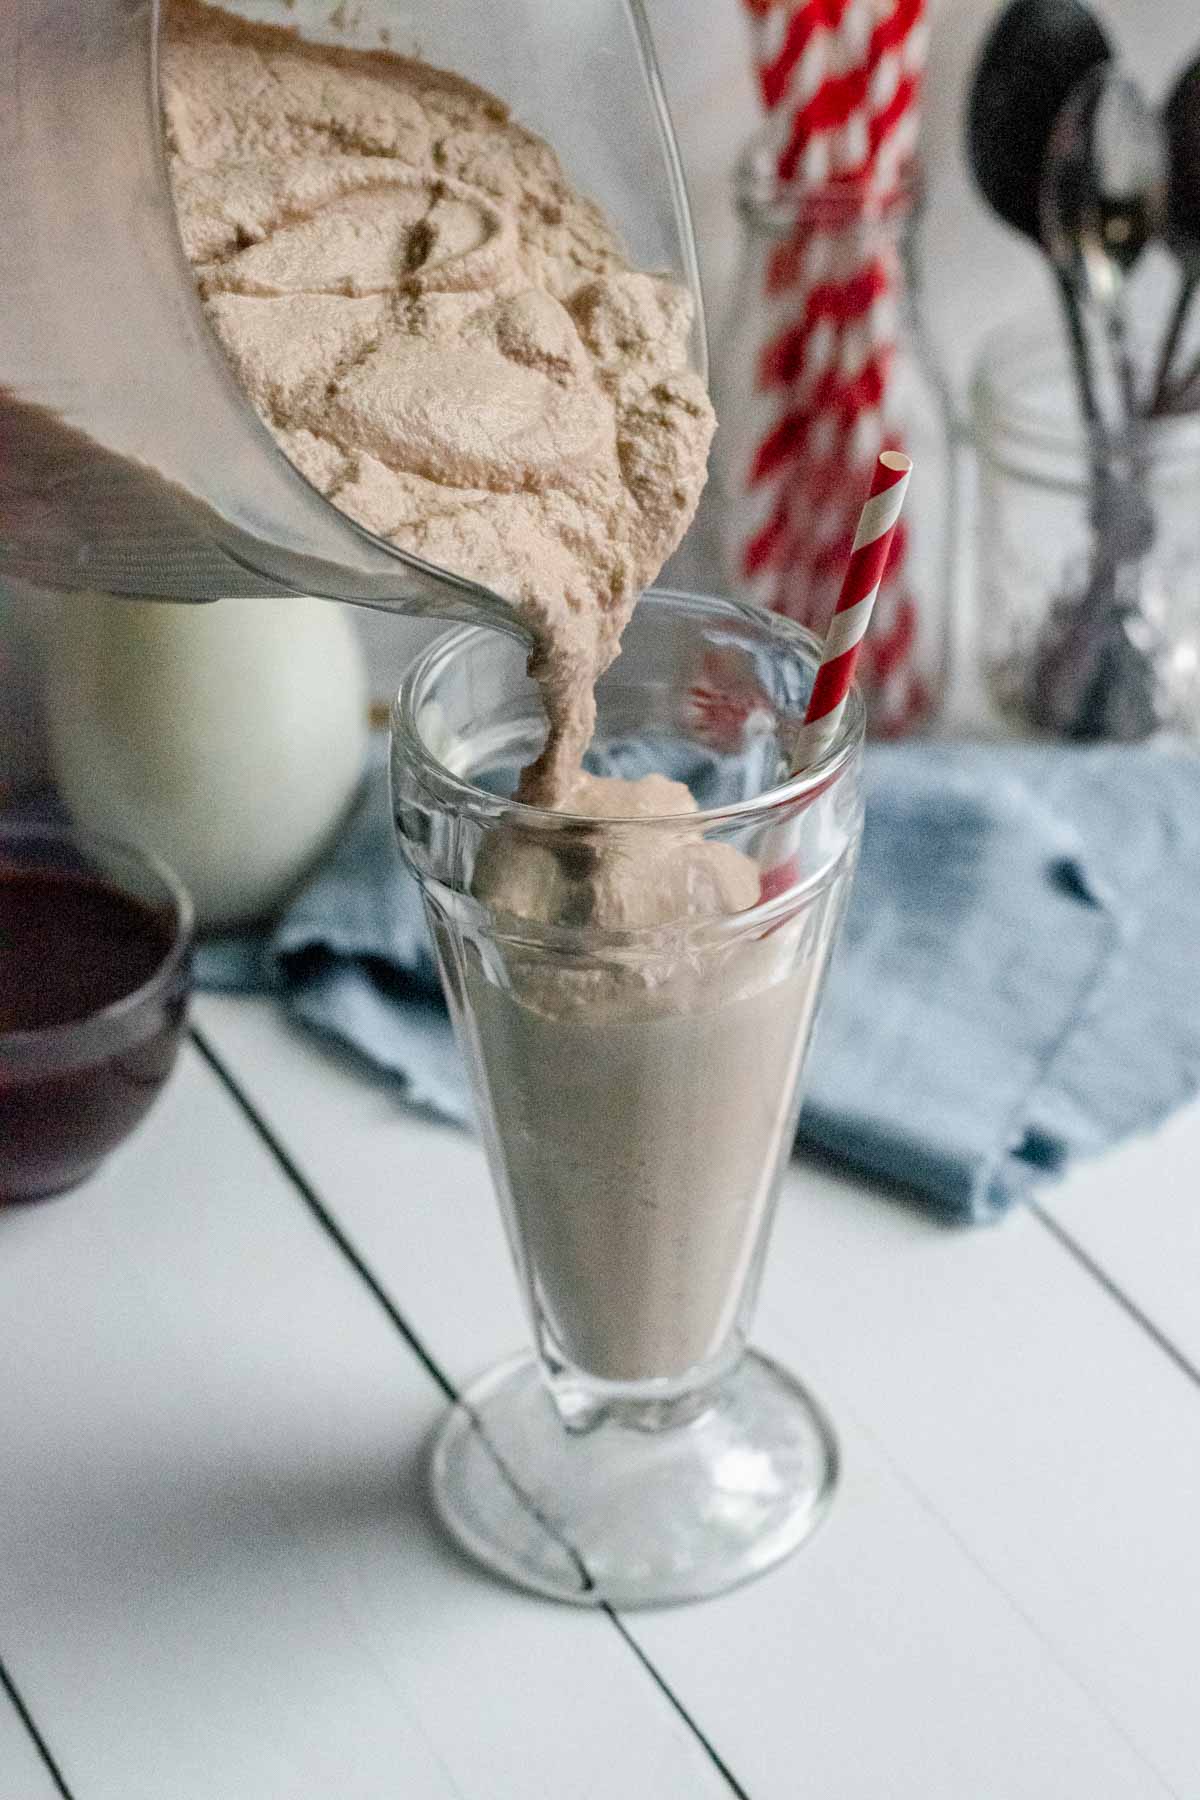 Wendy's Chocolate Frosty pouring into serving glass